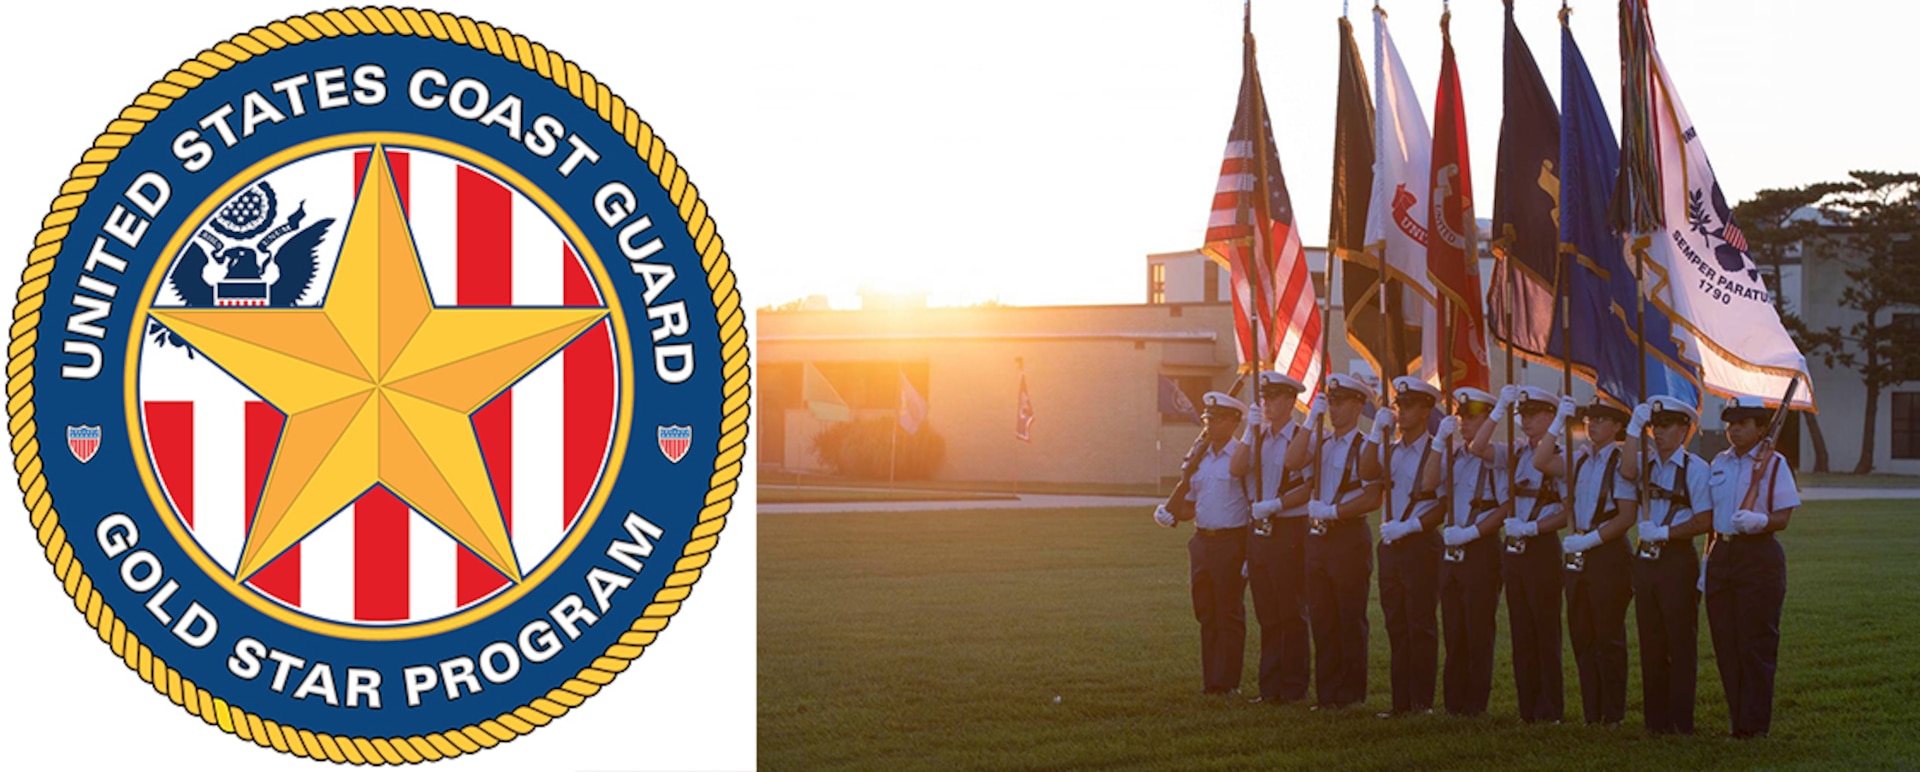 Gold Star Memorial Day Sunset Parade Graphic